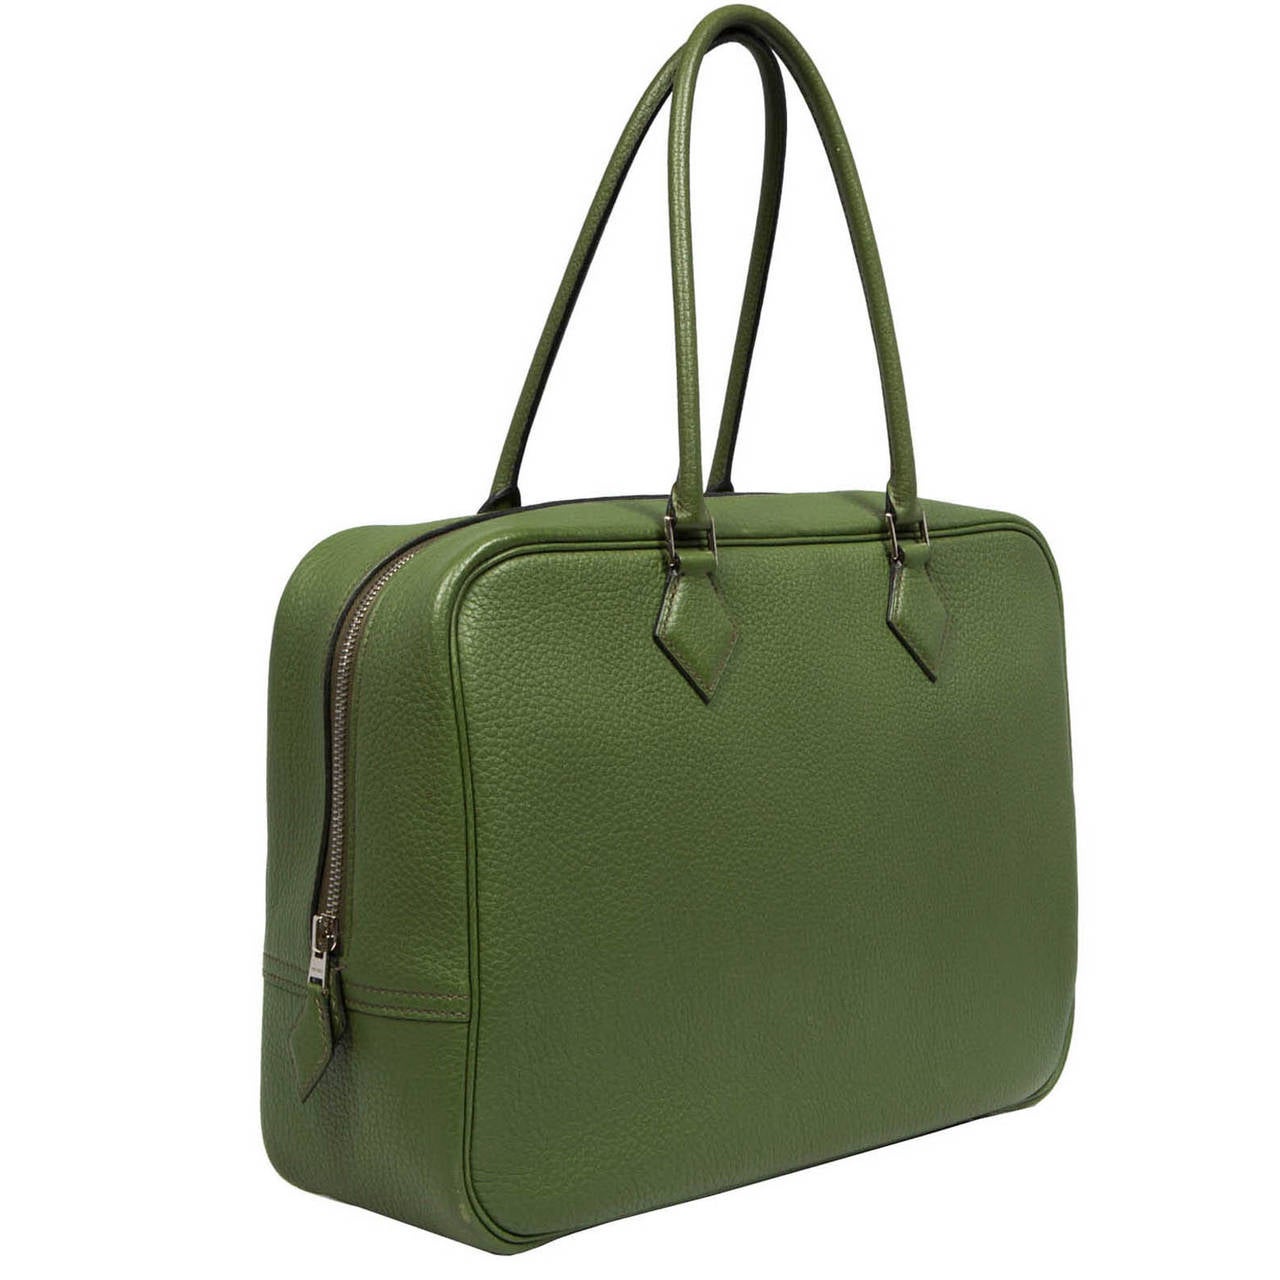 This flawless Plume bag from Hermès comes in Olive Green Togo Leather and features silver and palladium-plated hardware, curved handles and three interior open pockets.

Materia: Togo Leather

Measurements: Length:32cm Width: 10cm Height: